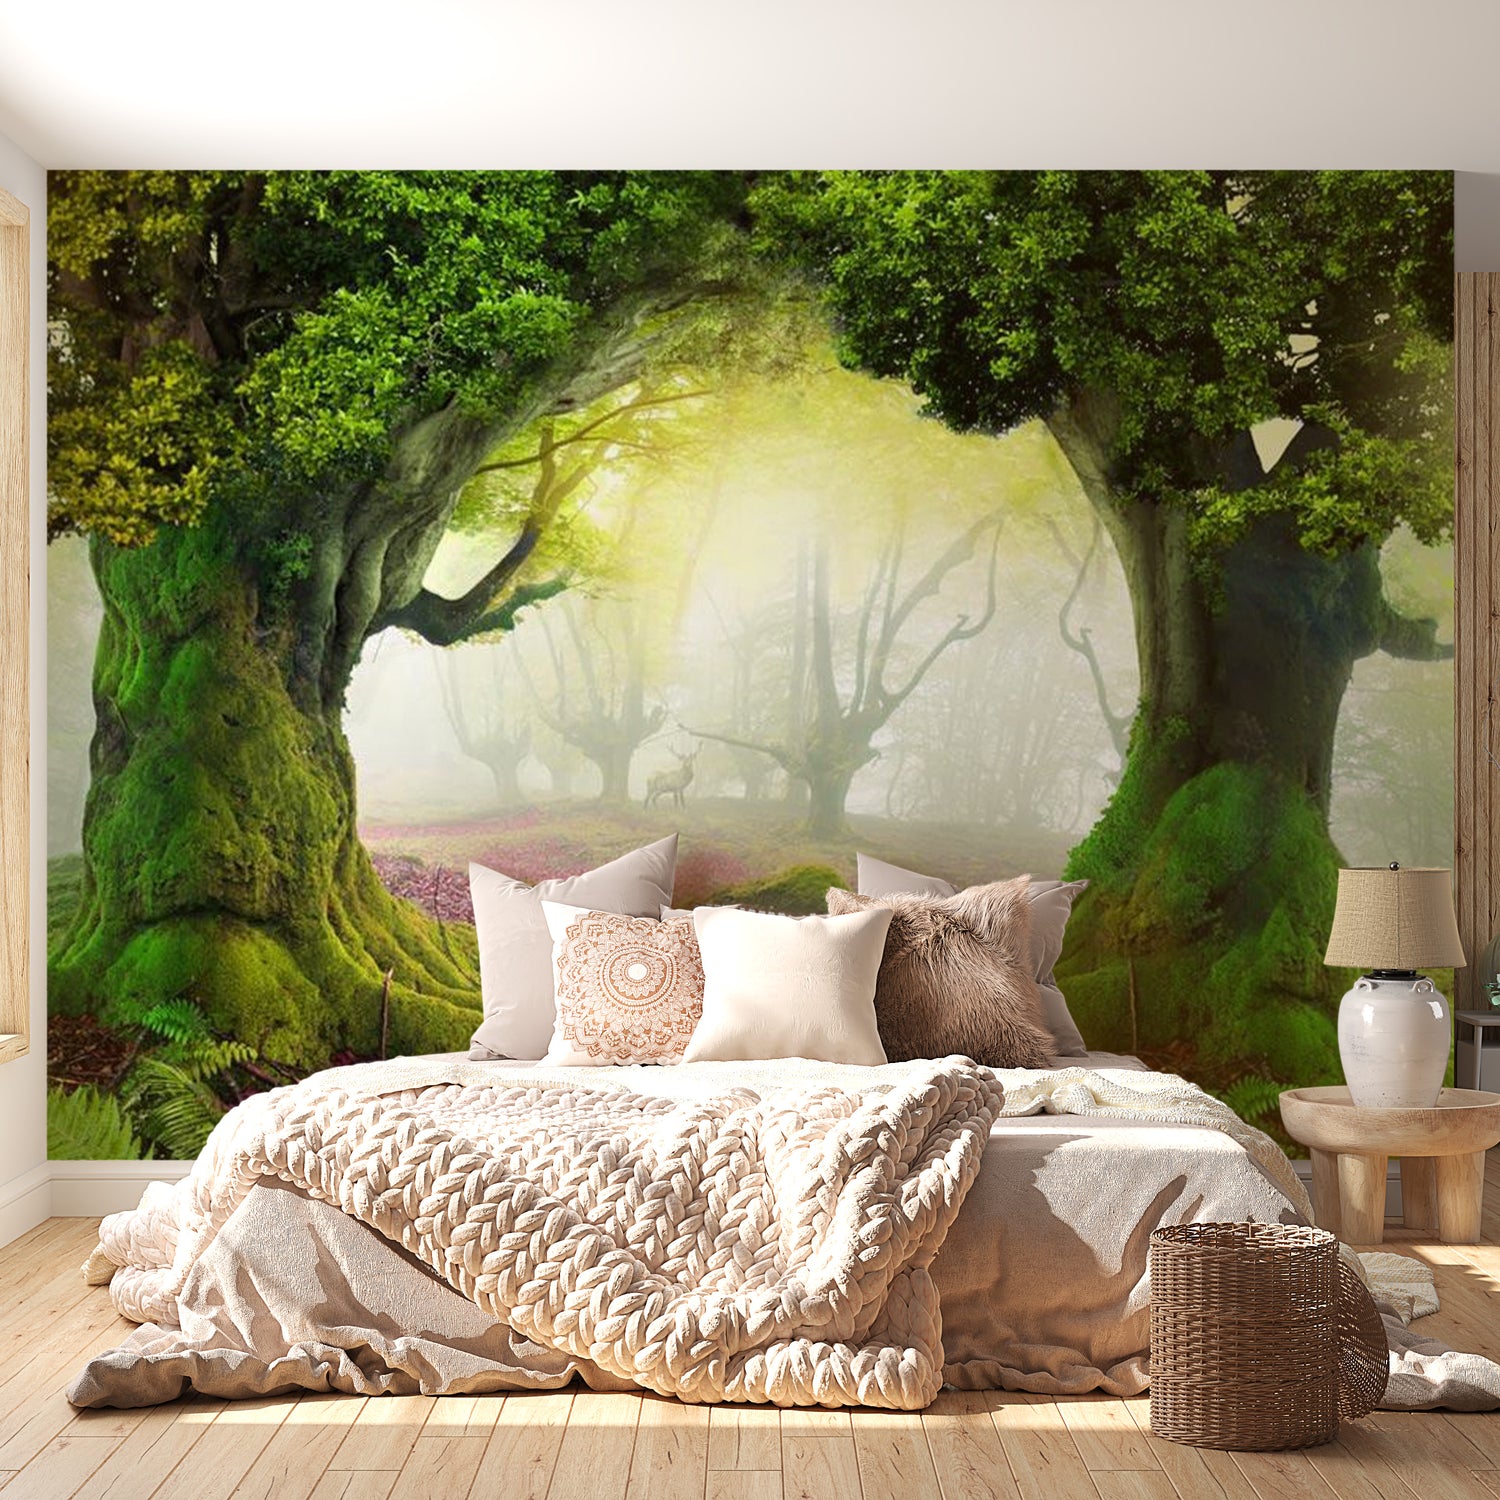 Peel & Stick Fantasy Wall Mural - Enchanted Forest - Removable Wall Decals